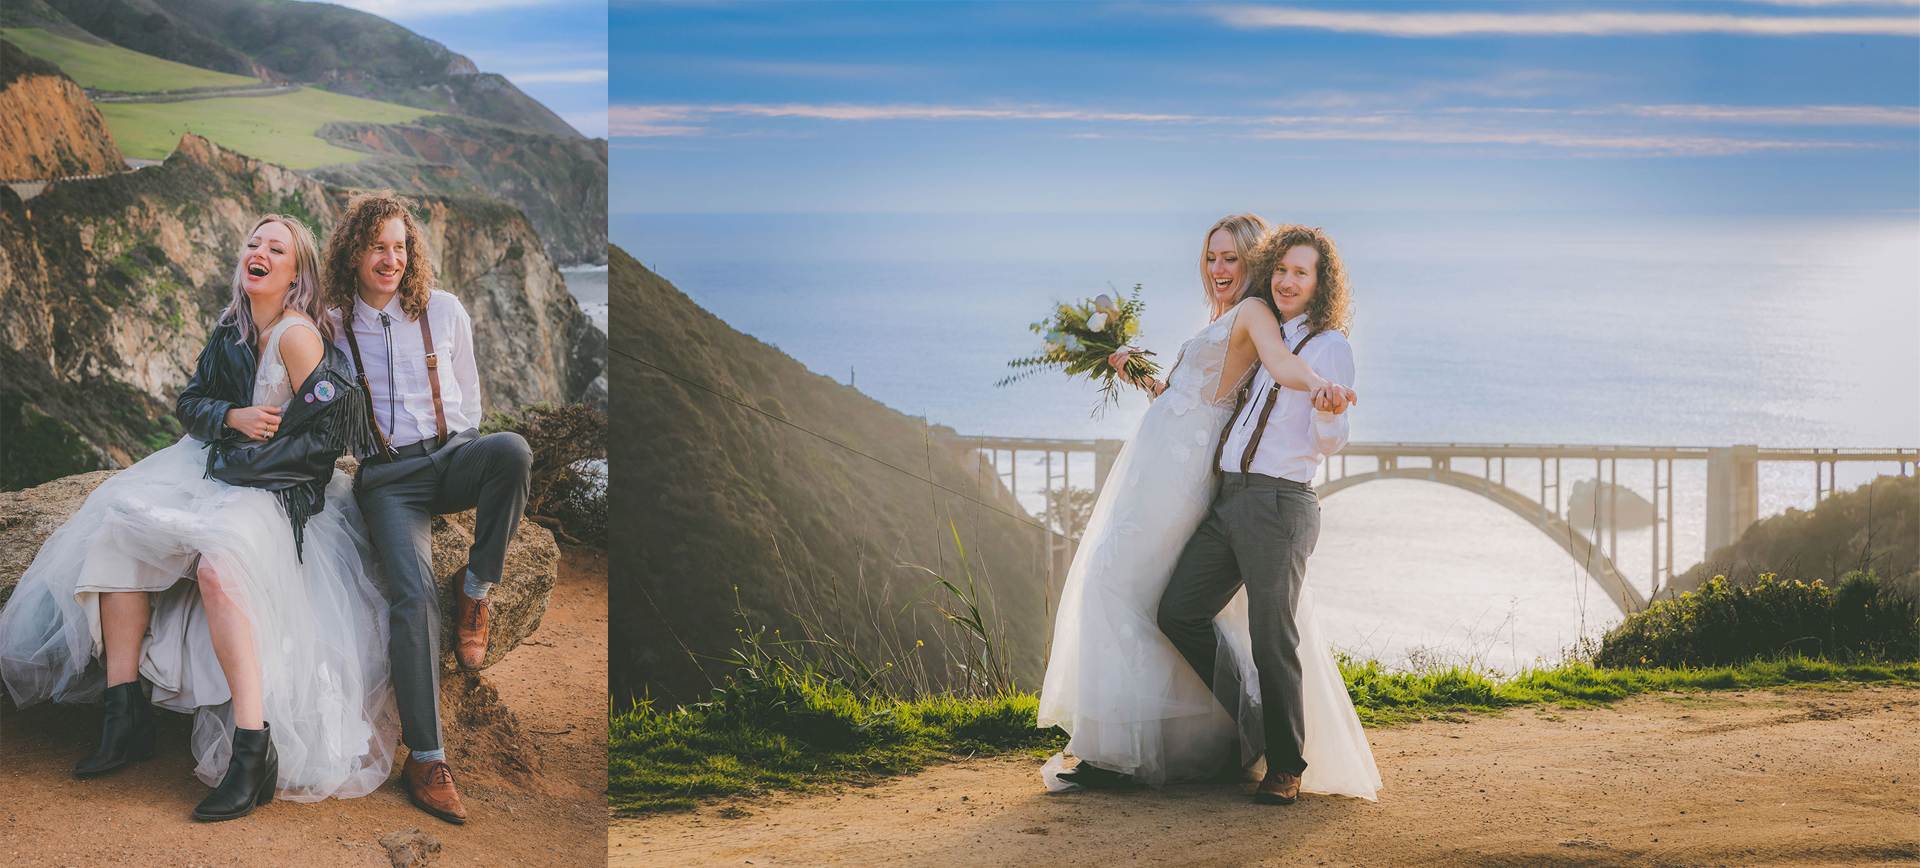 Big Sur Elopement package - Bride and groom enjoying their elopement day in Big Sur